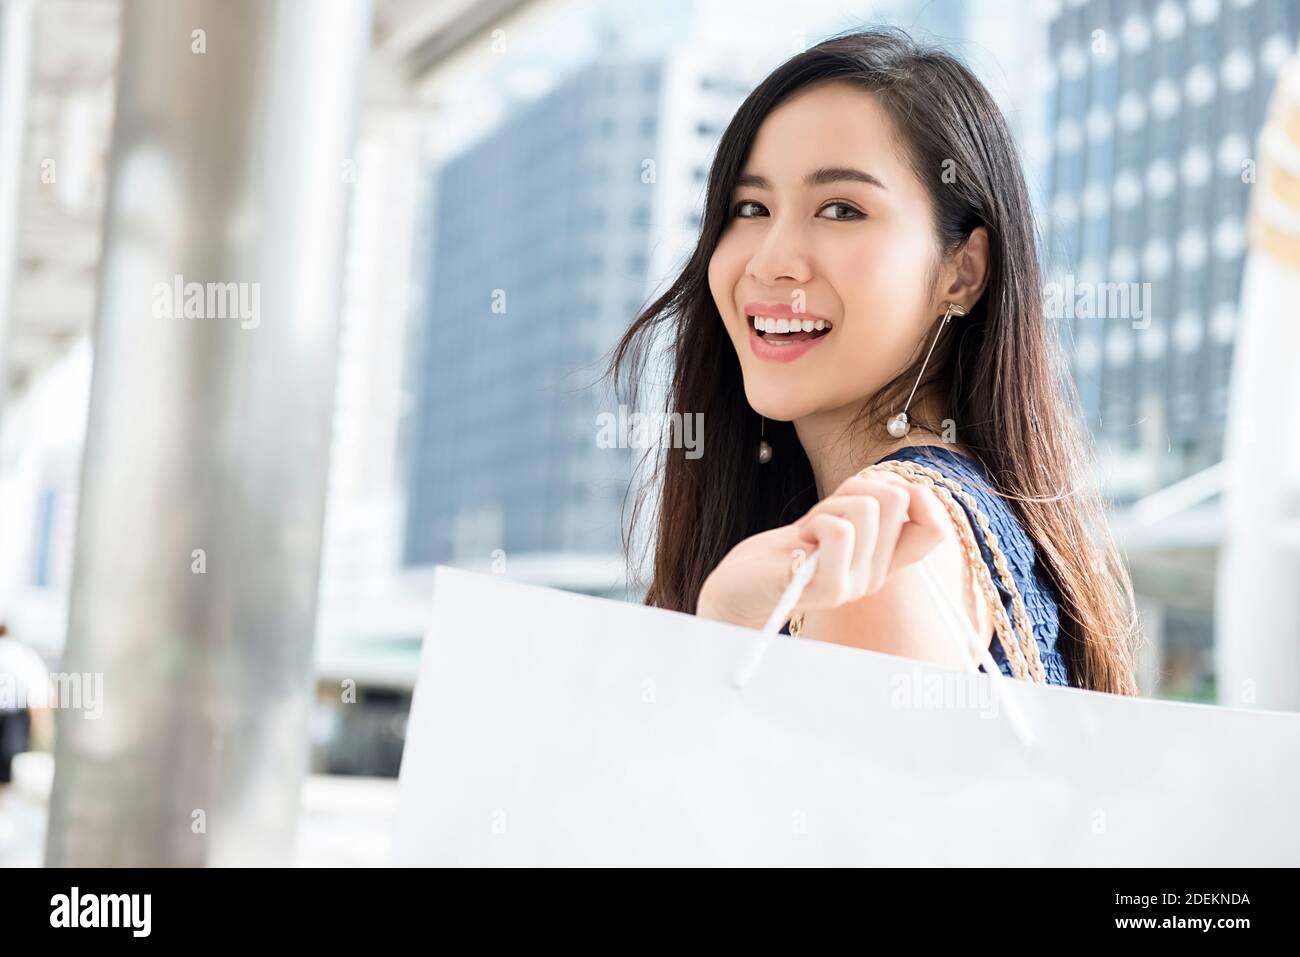 Beautiful young Asian woman carrying bag enjoying her time in the city after shopping during holiday sales season Stock Photo